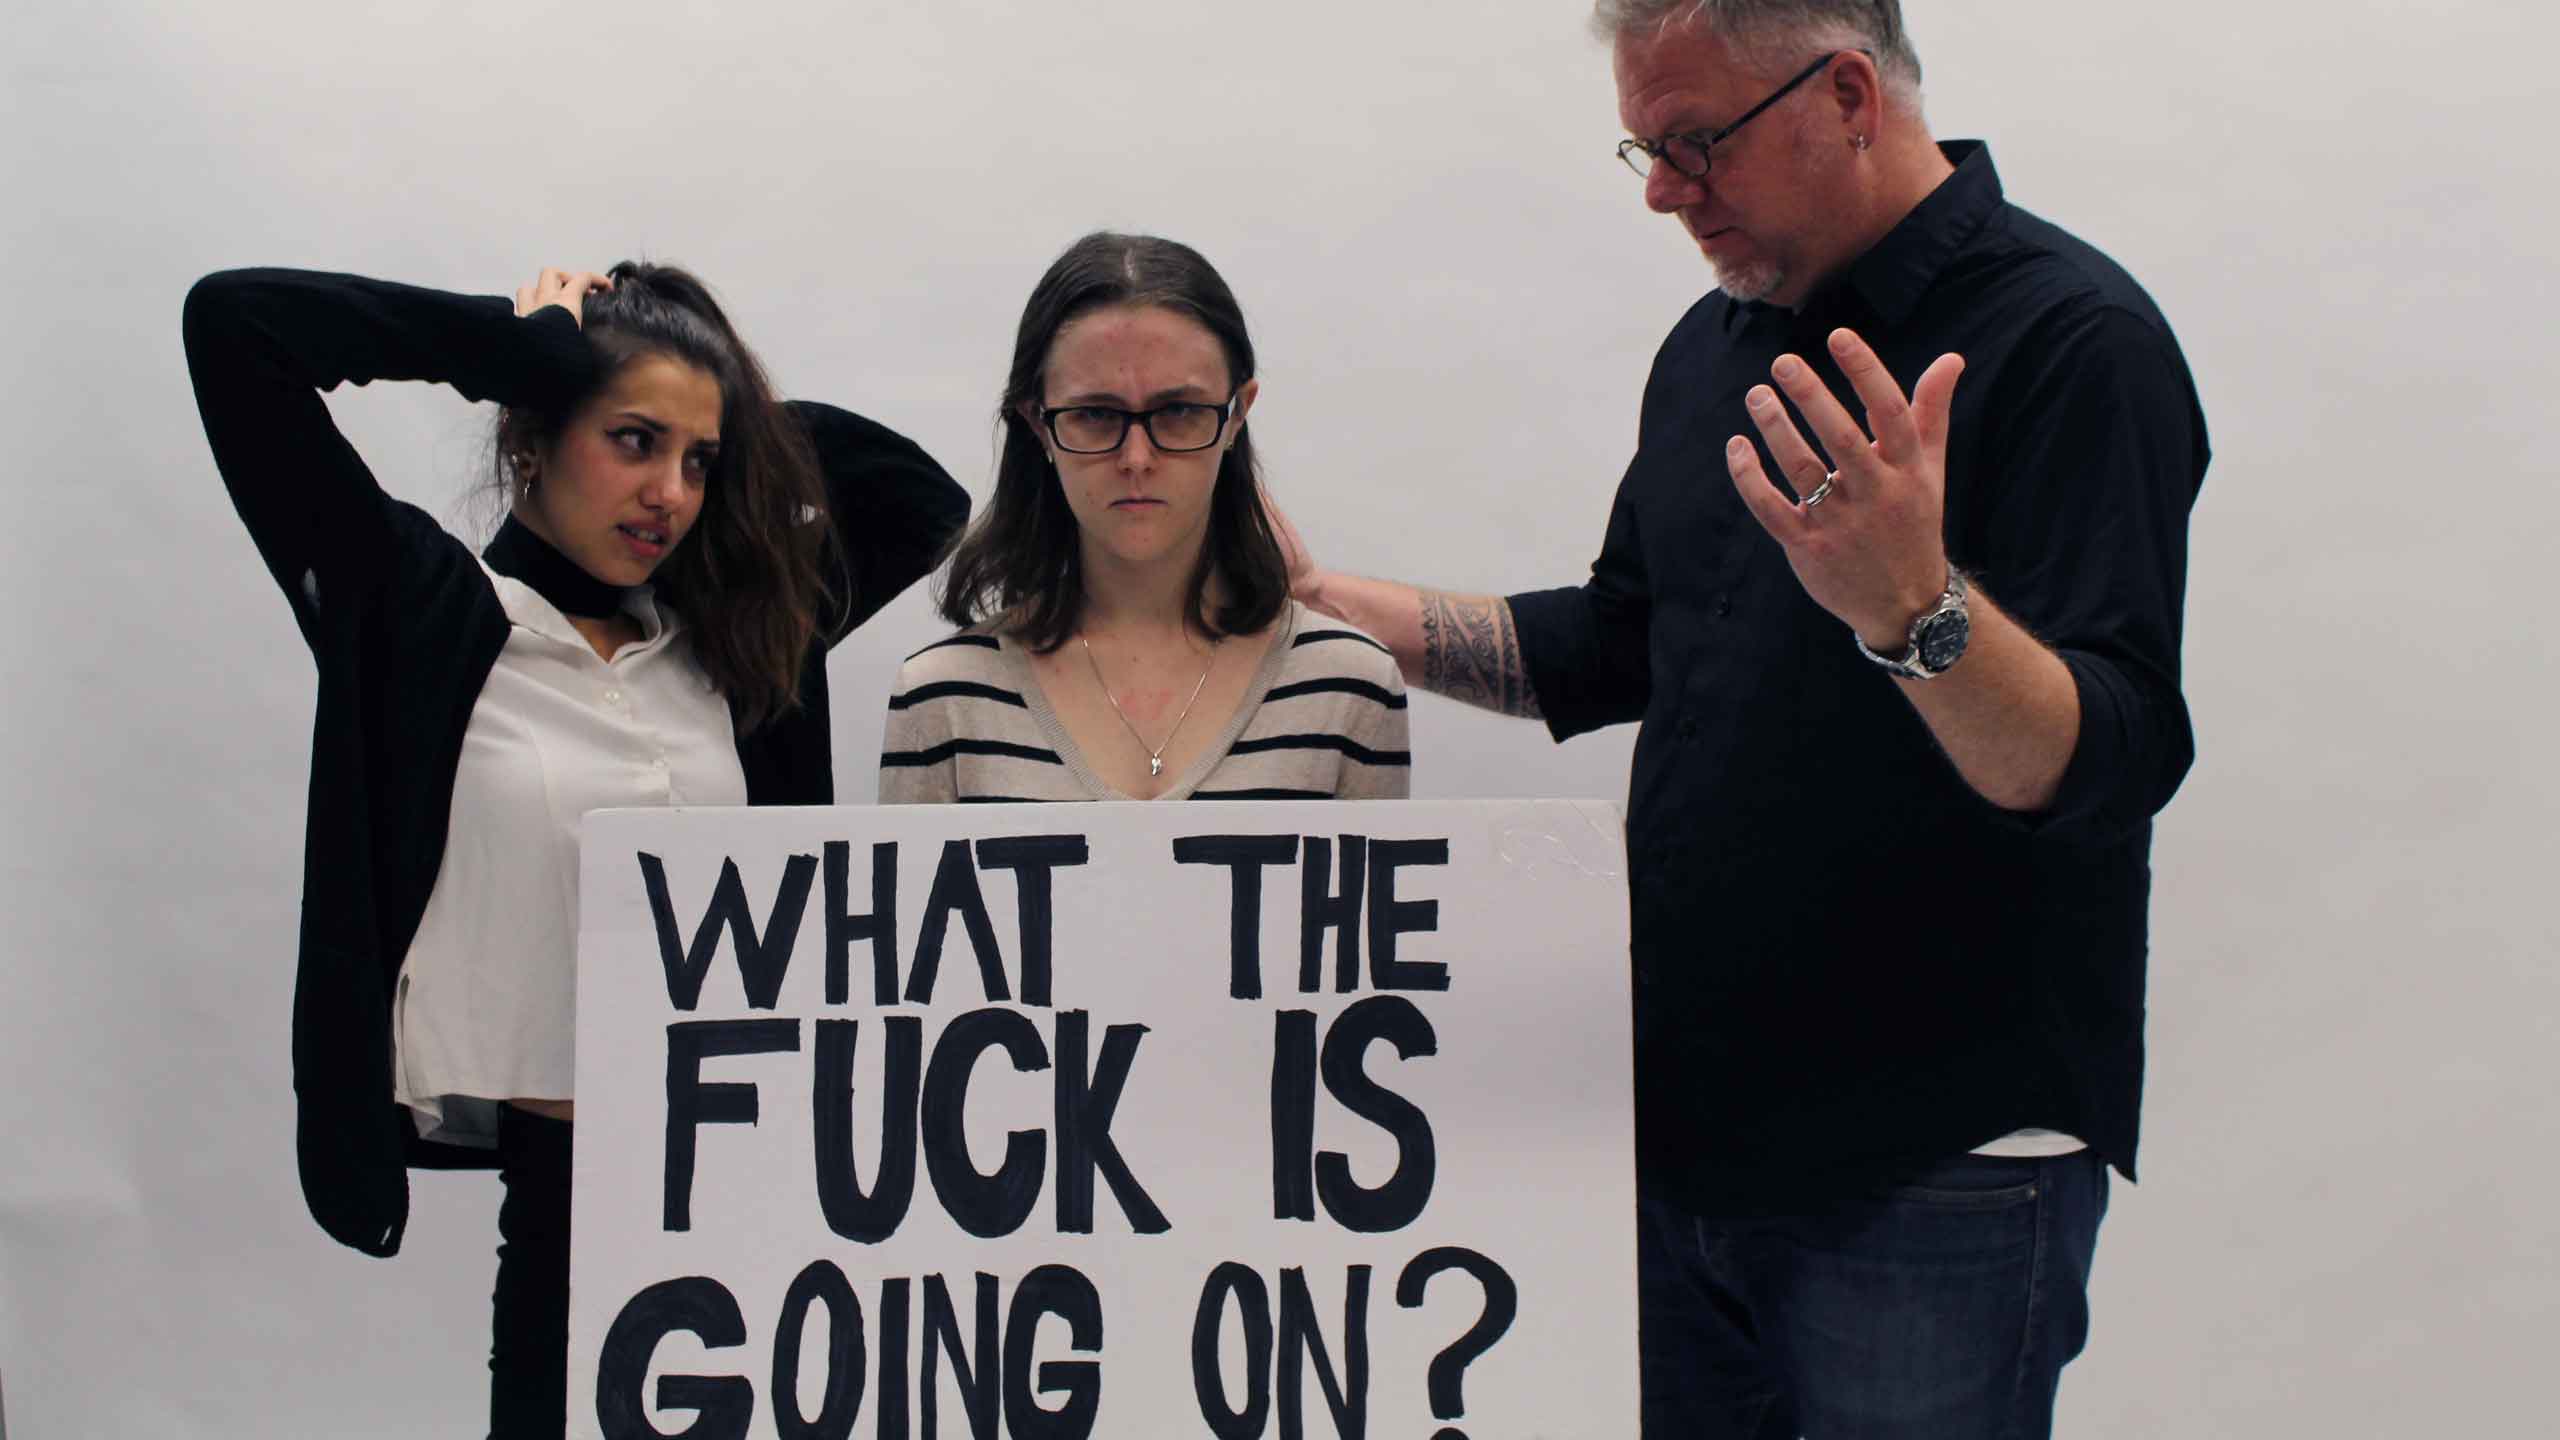 TAs, students and profs are all confused. PHOTO: SARAH KRICHEL